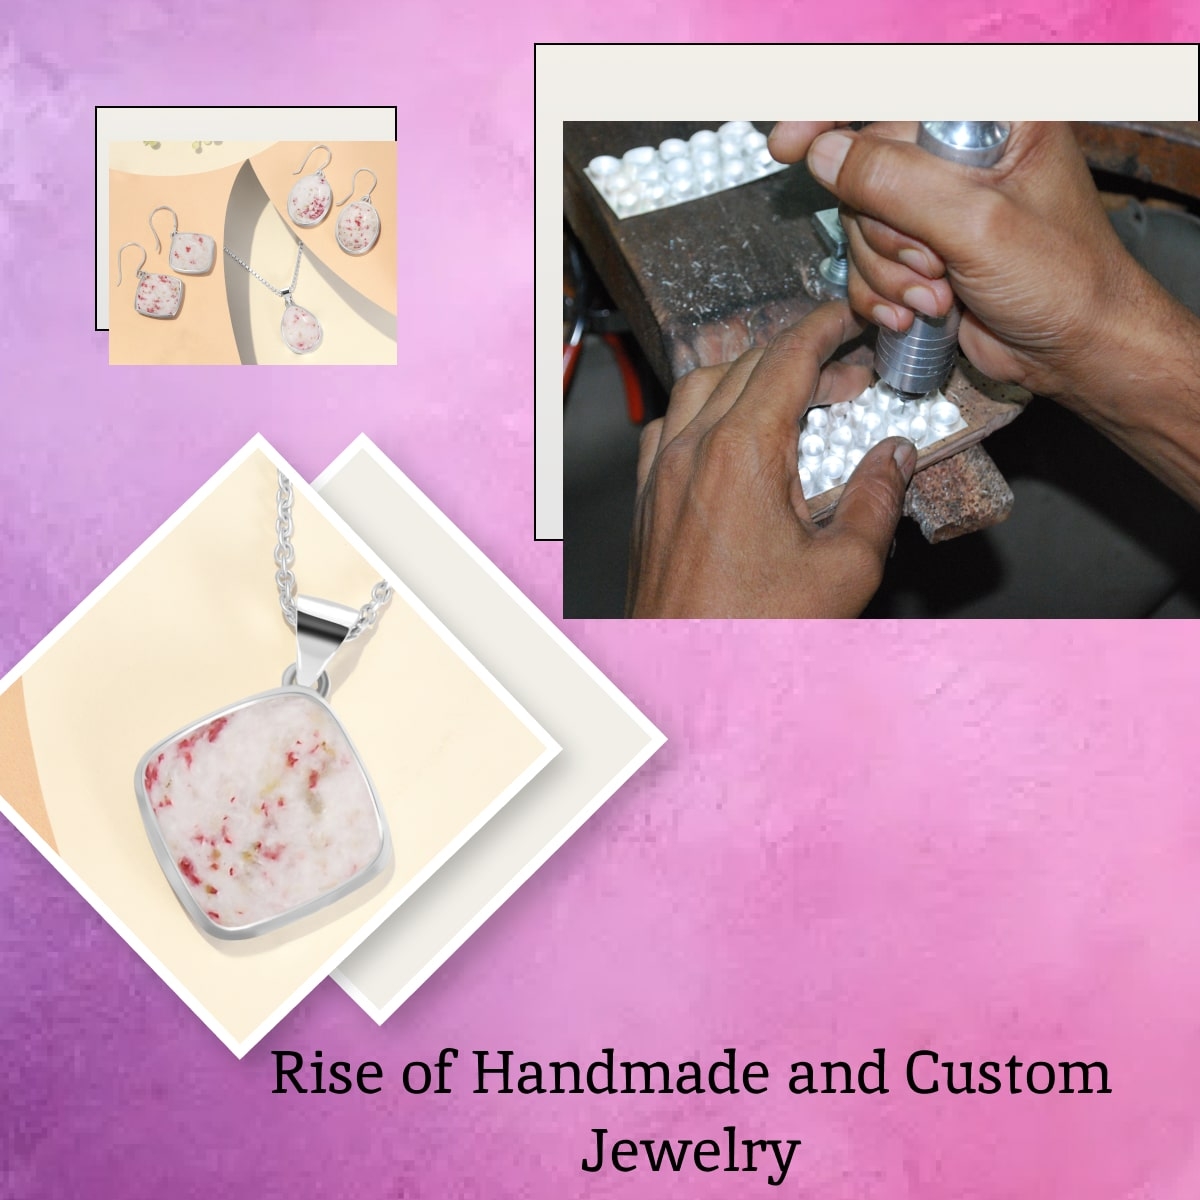 The Ascent of Custom and Handmade Jewelry